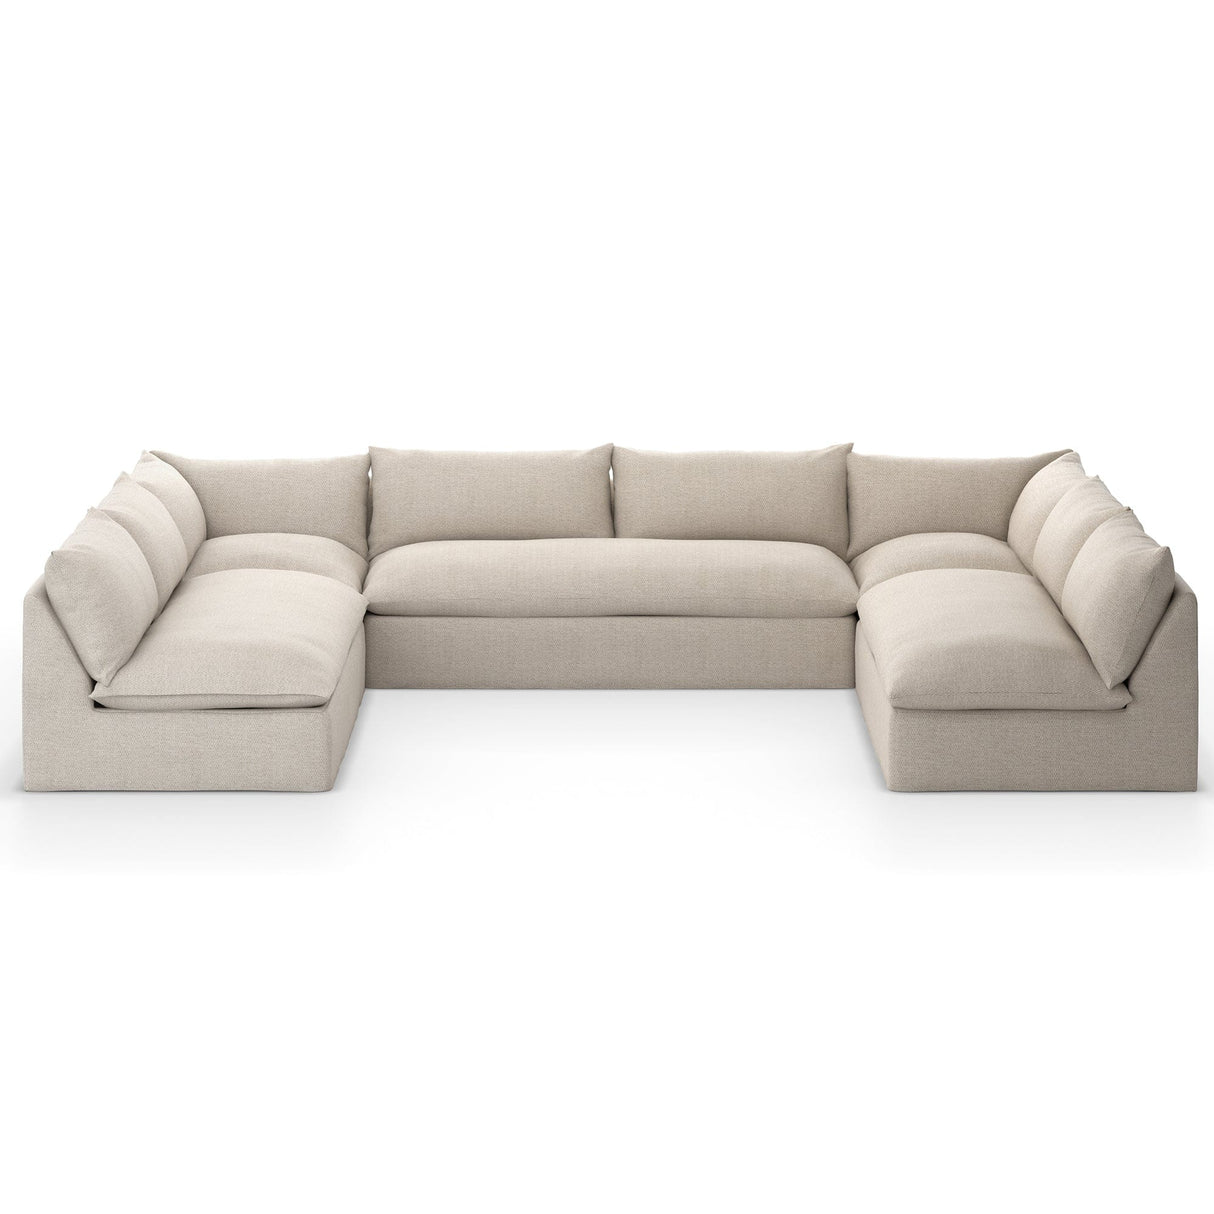 Four Hands Grant Outdoor 5 Piece Sectional Outdoor Furniture four-hands-235714-002 801542048976